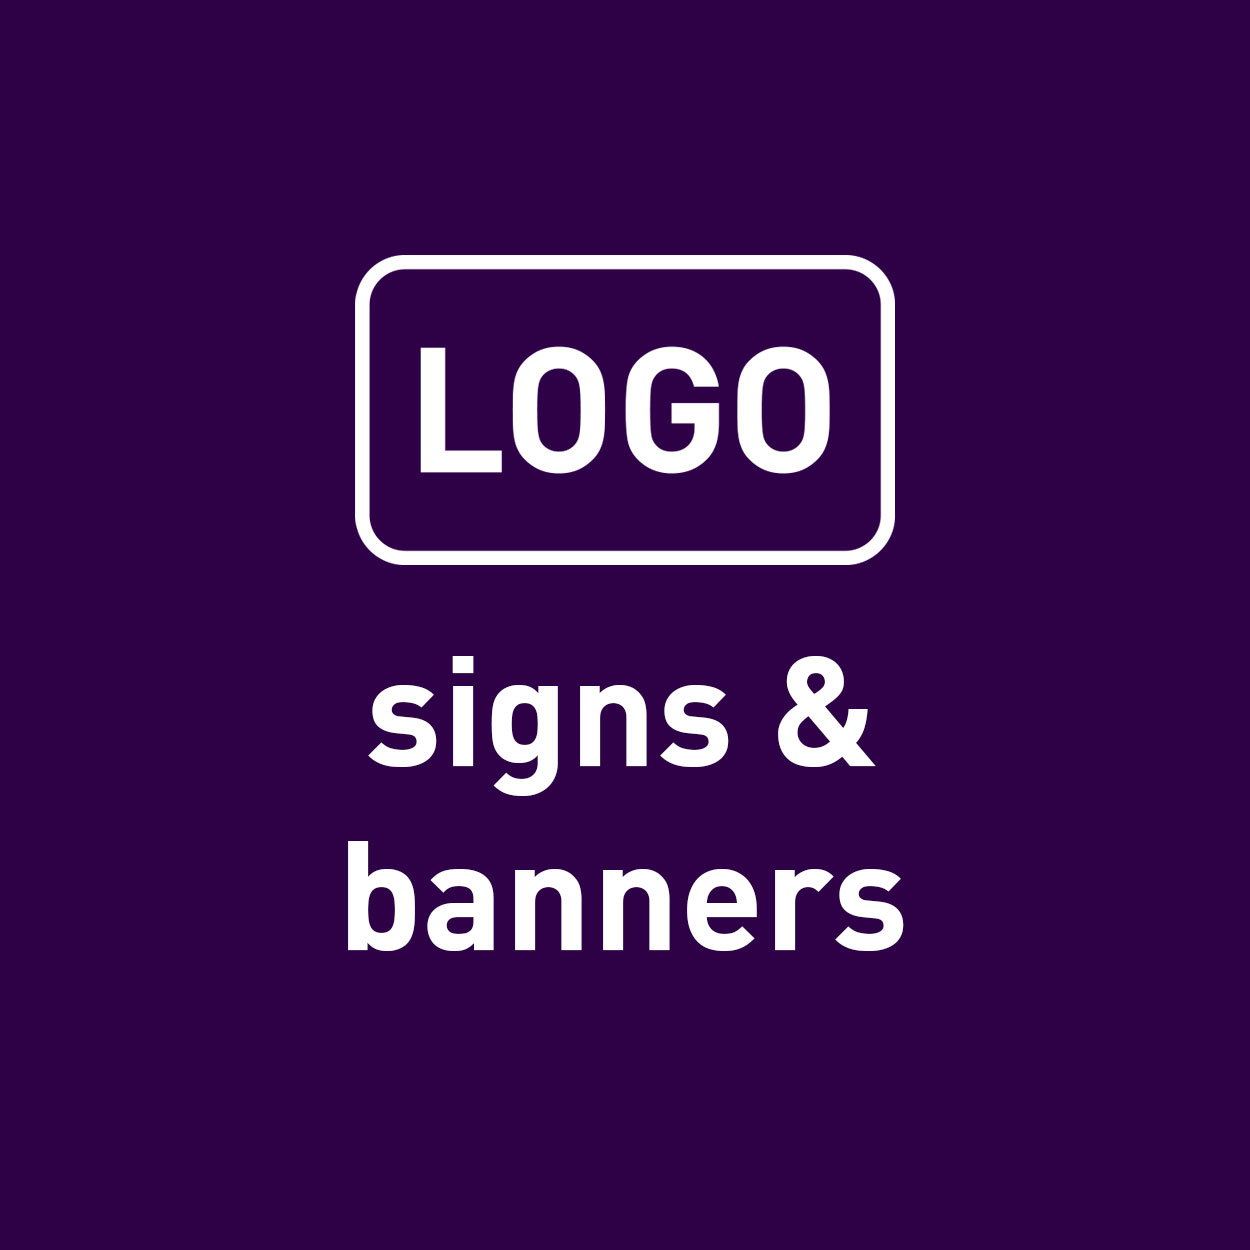 Logo signs and banners